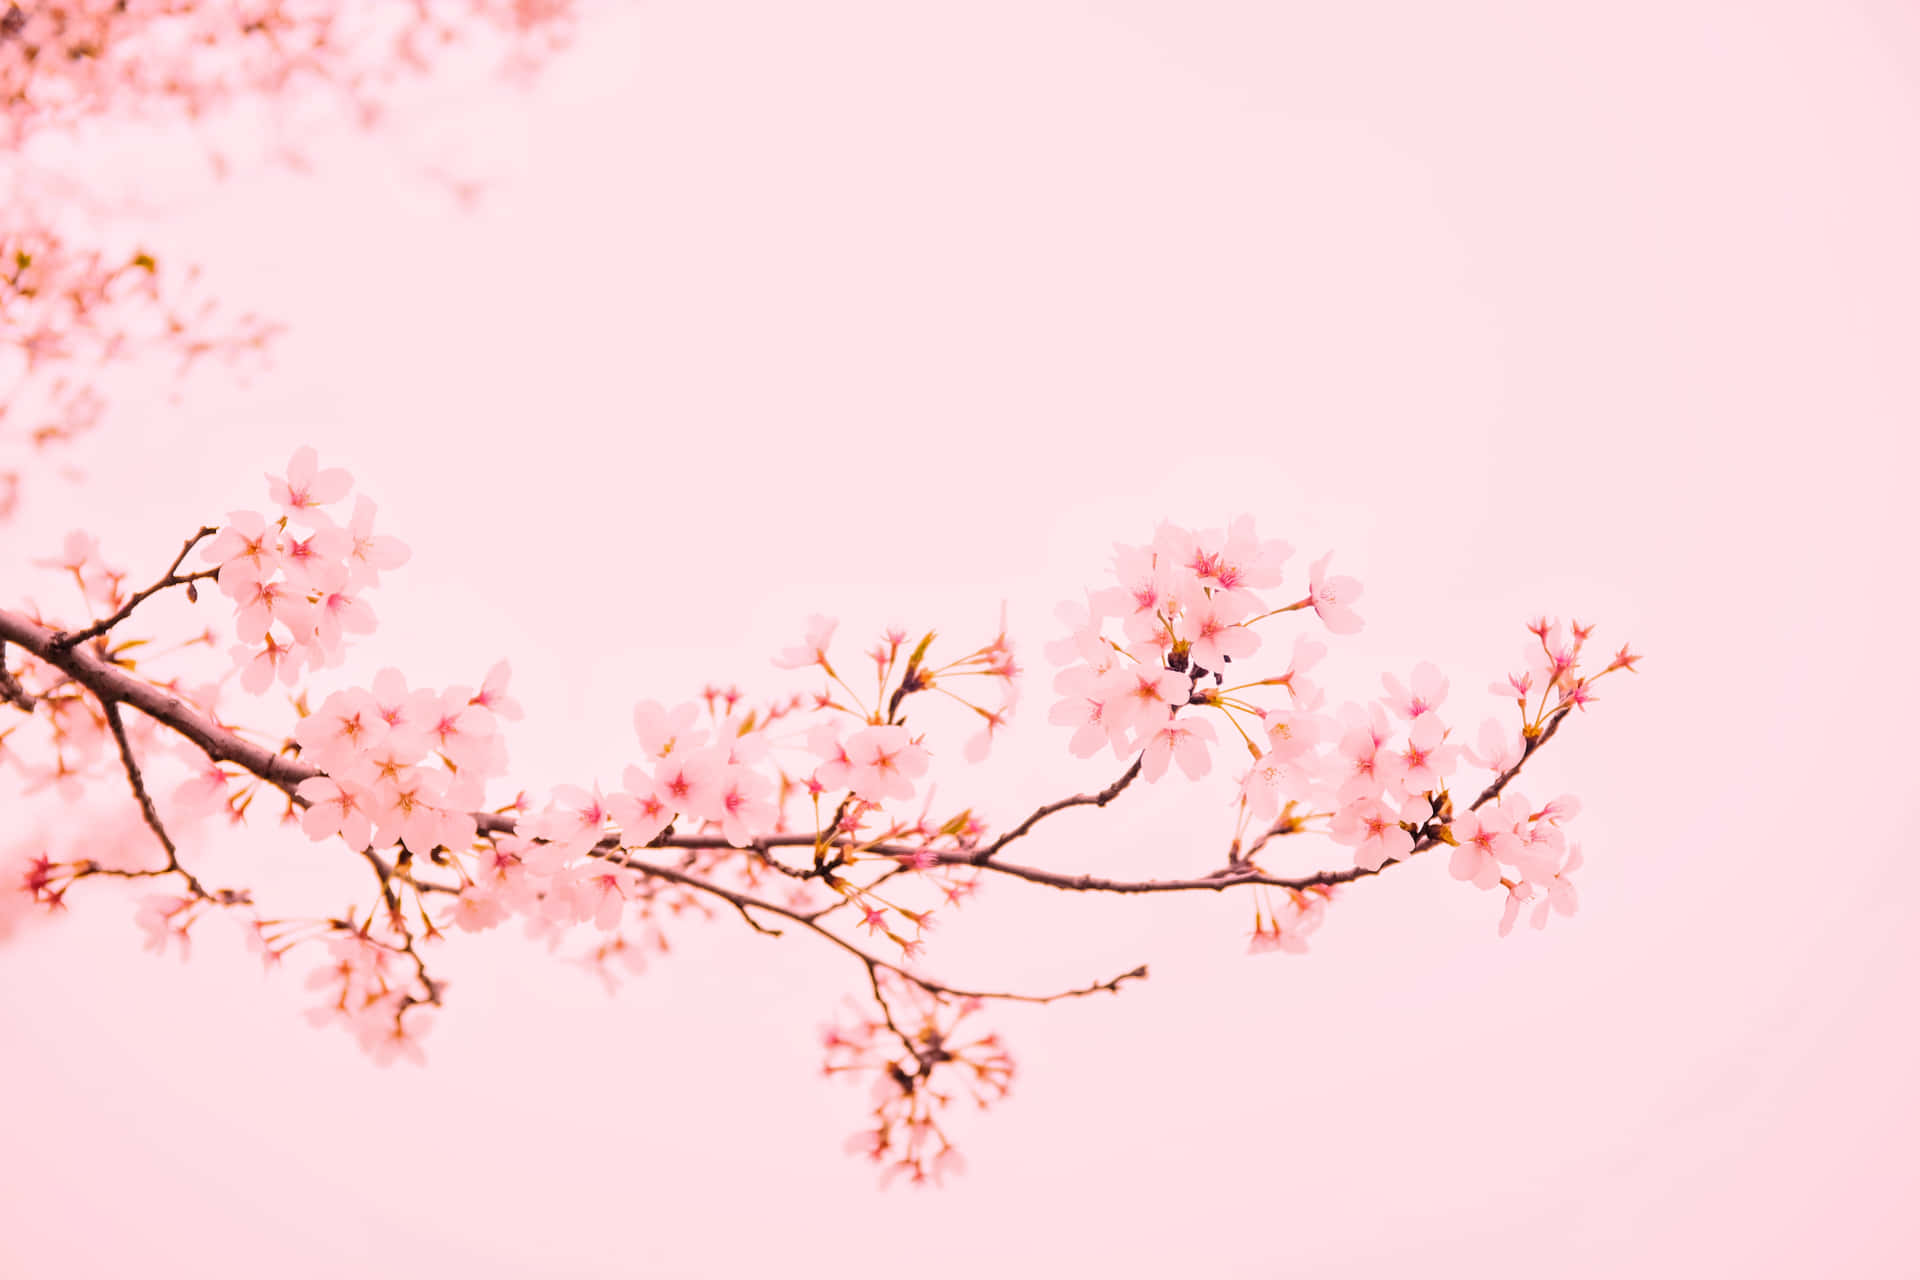 Flowering of Beauty - A Spectacular View of Pink Cherry Blossoms Wallpaper